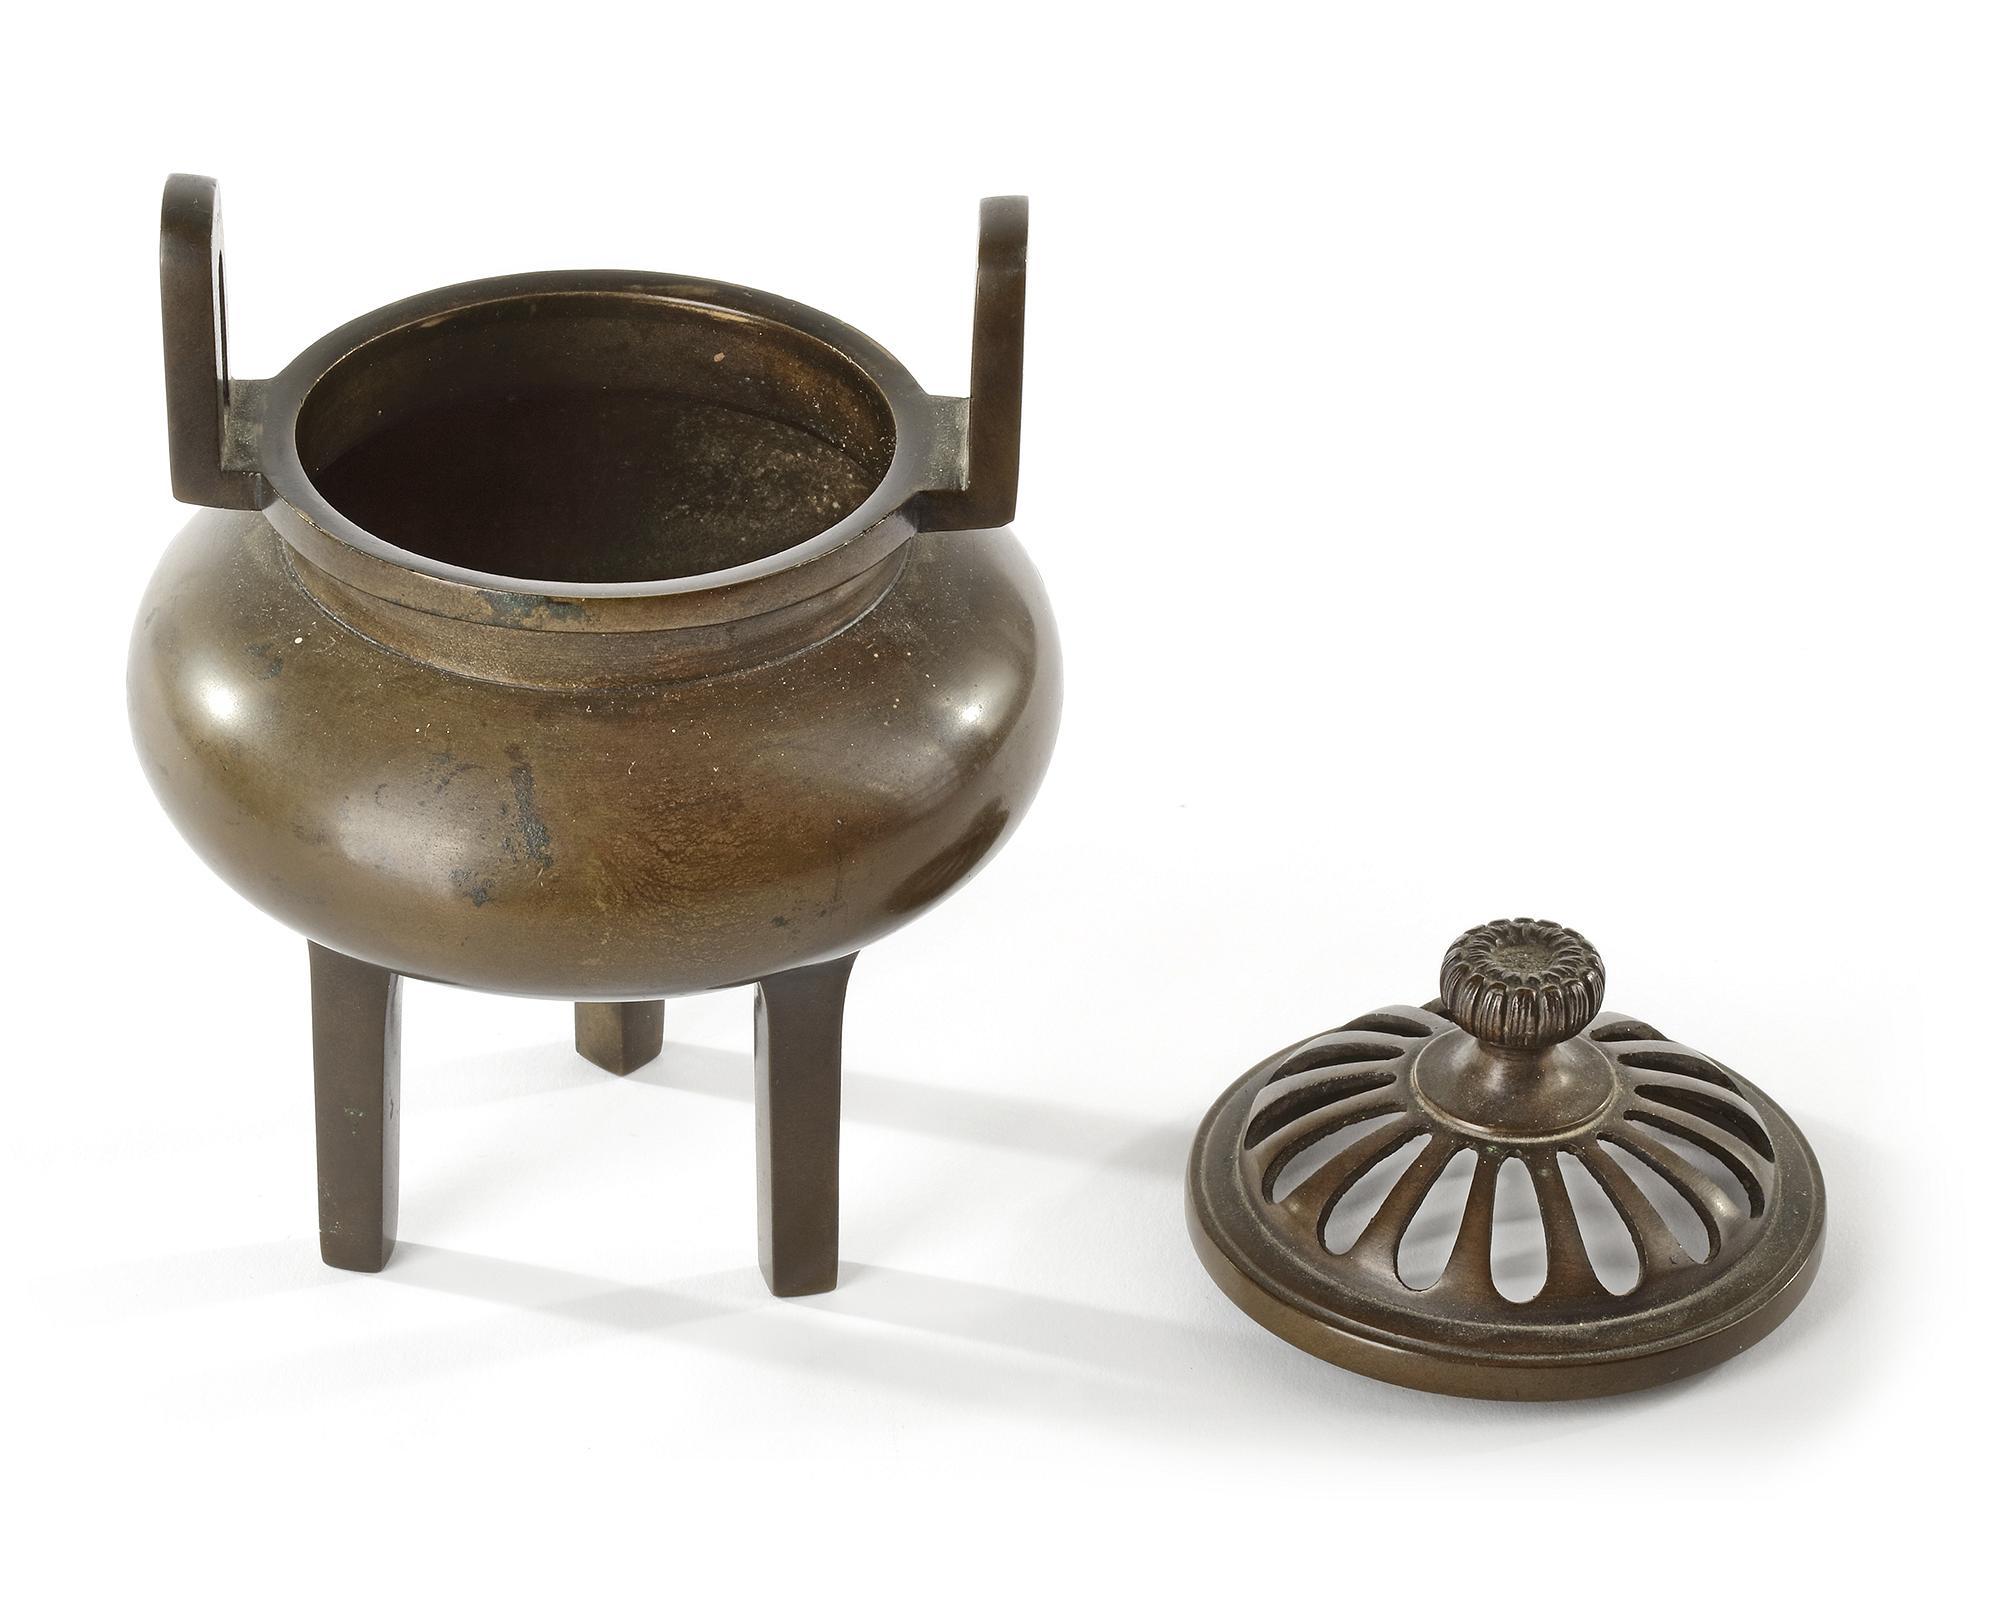 A JAPANESE BRONZE INCENSE BURNER (KOURO), MEIJI PERIOD (LATE 19TH CENTURY) - Image 2 of 4